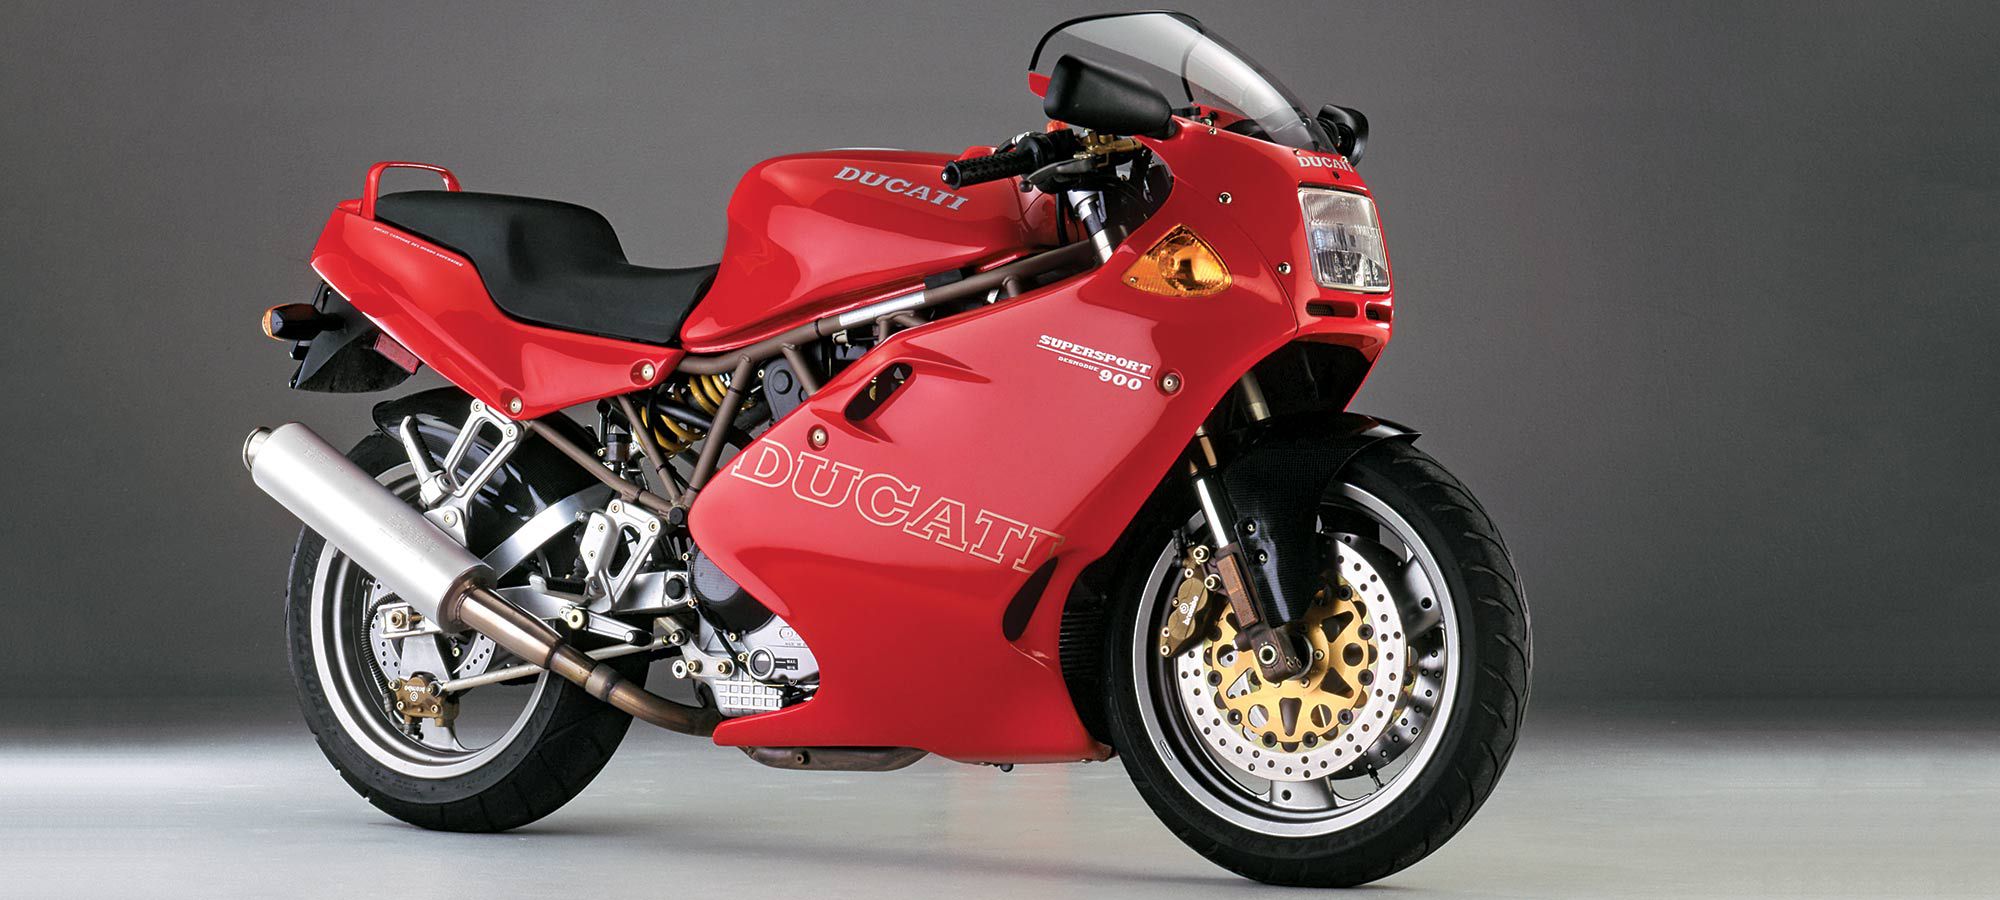 The 1991 1997 Ducati 900ss Is The Used Motorcycle You Need Cycle World